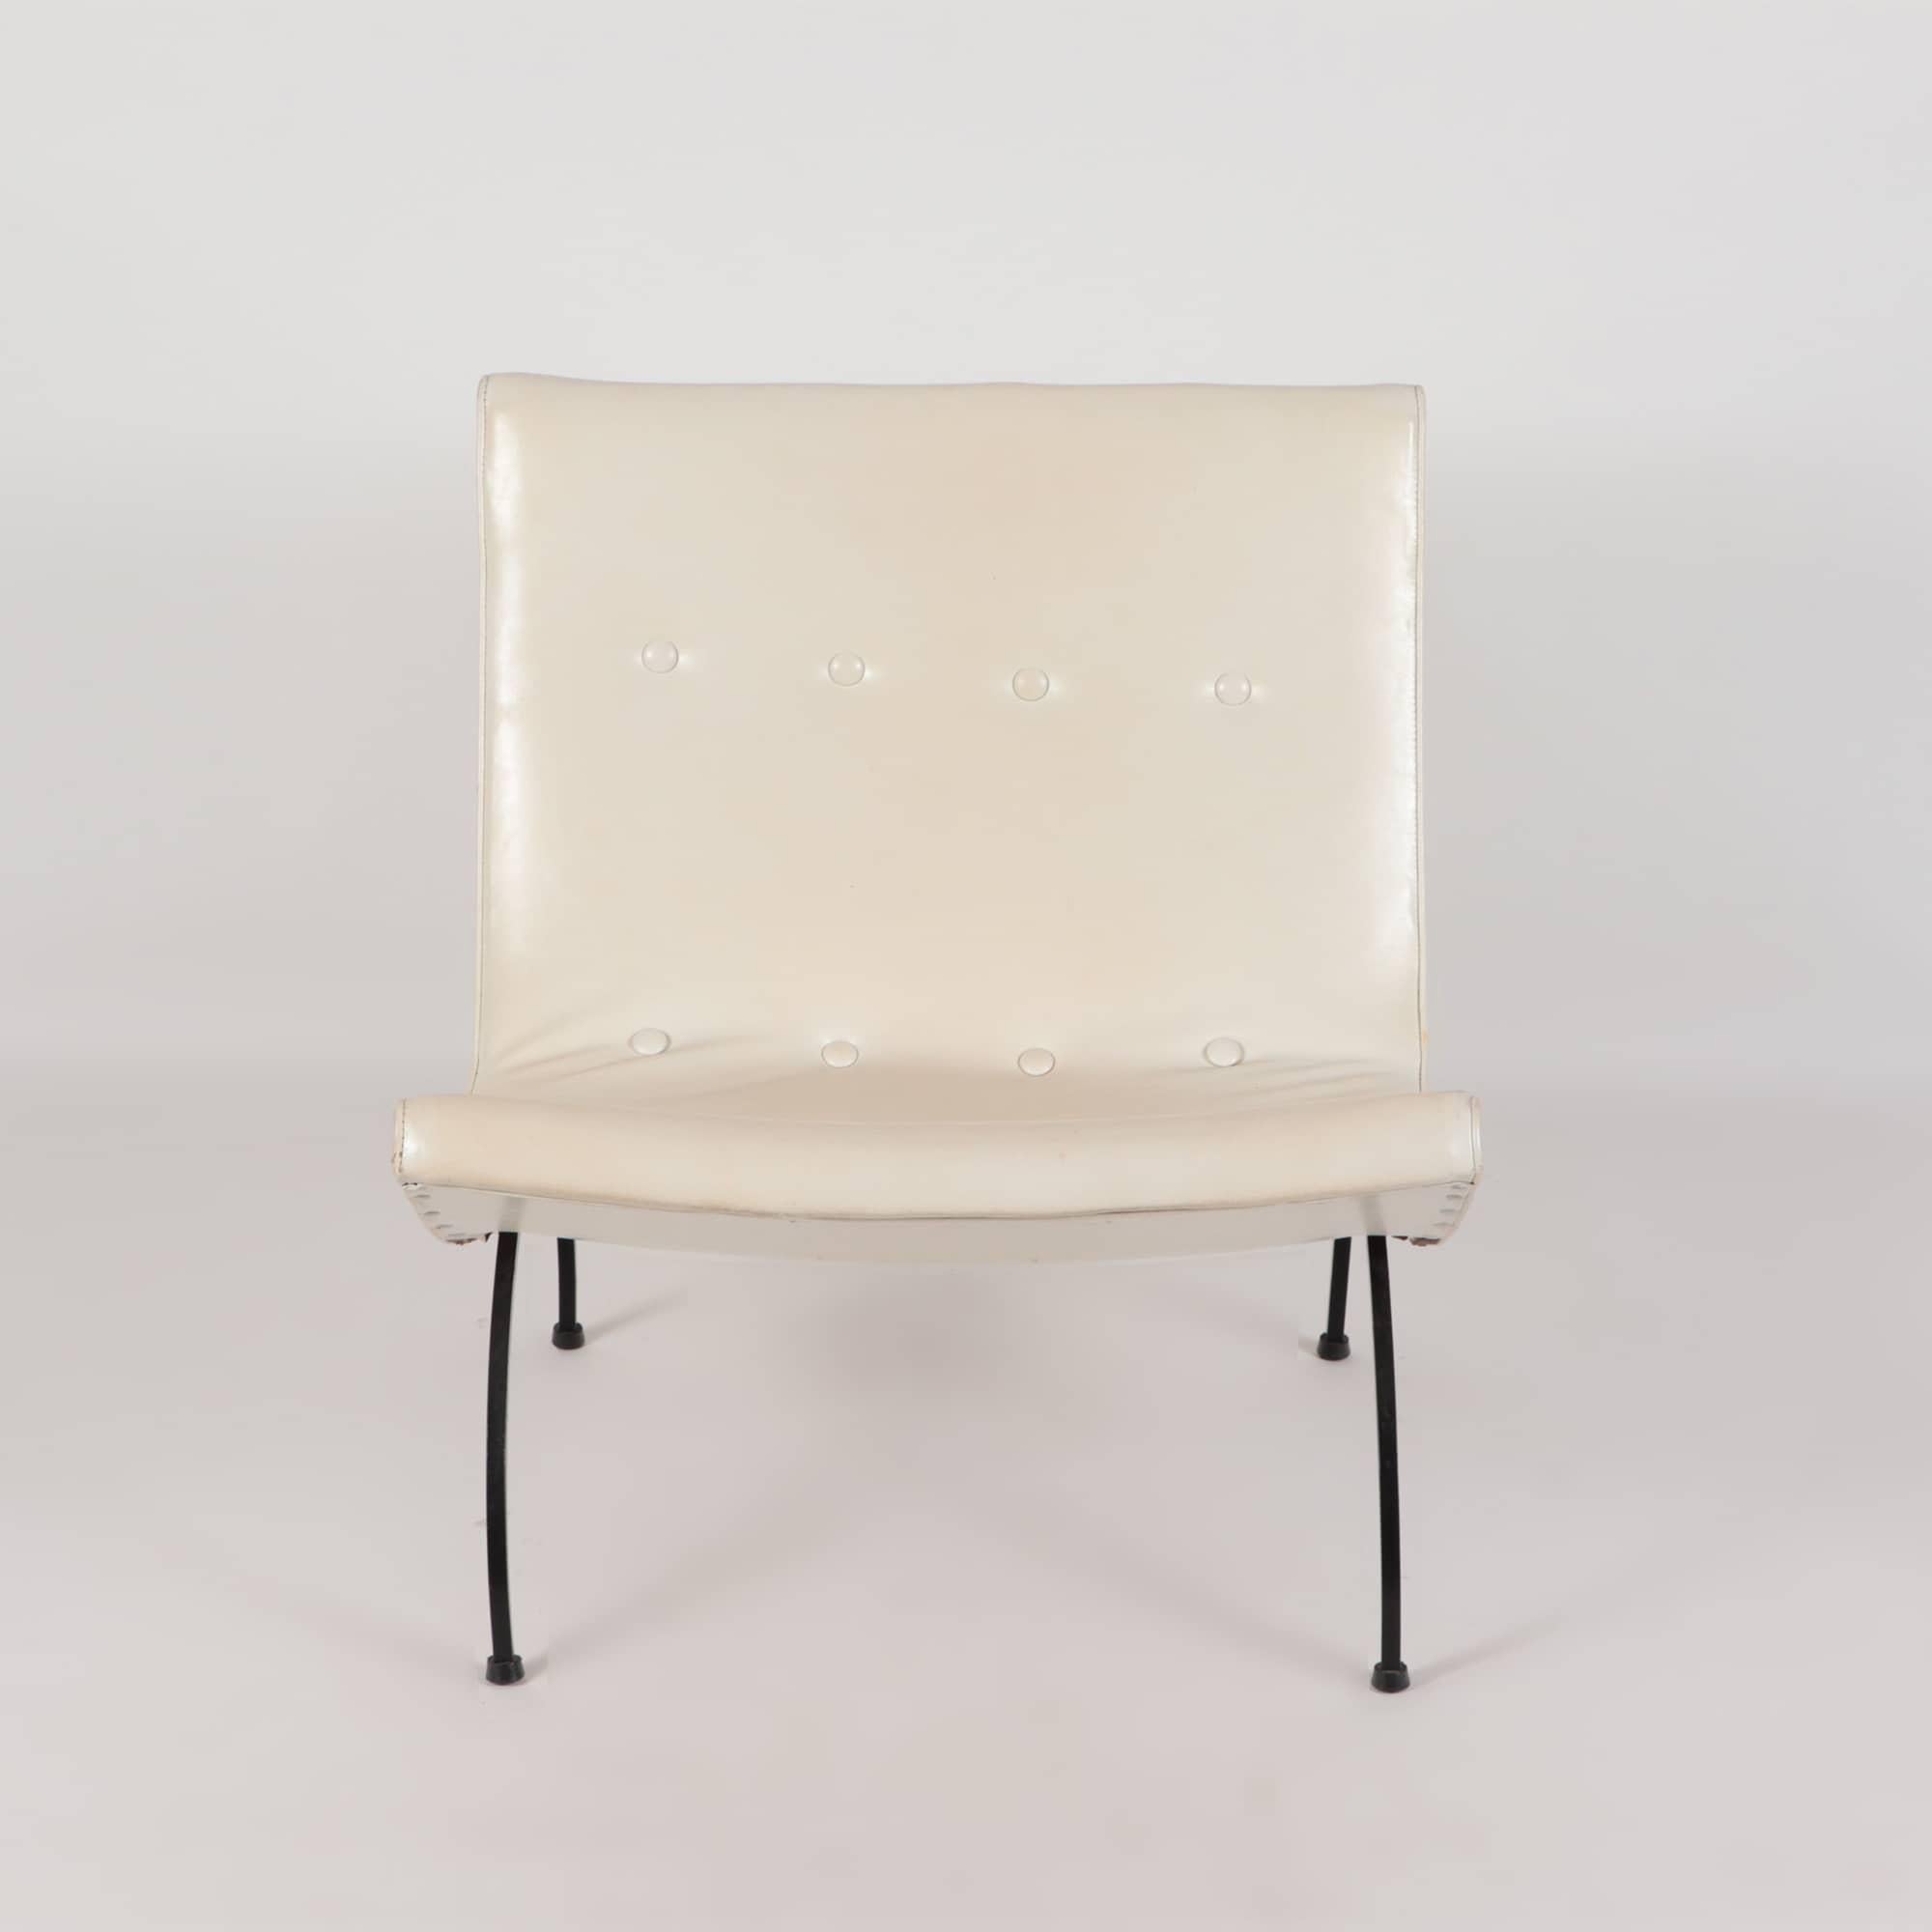 A Mid-Century Modern Milo Baughman white leather Scoop chair. An iconic form having an ergonomic design with arched iron legs 1950.